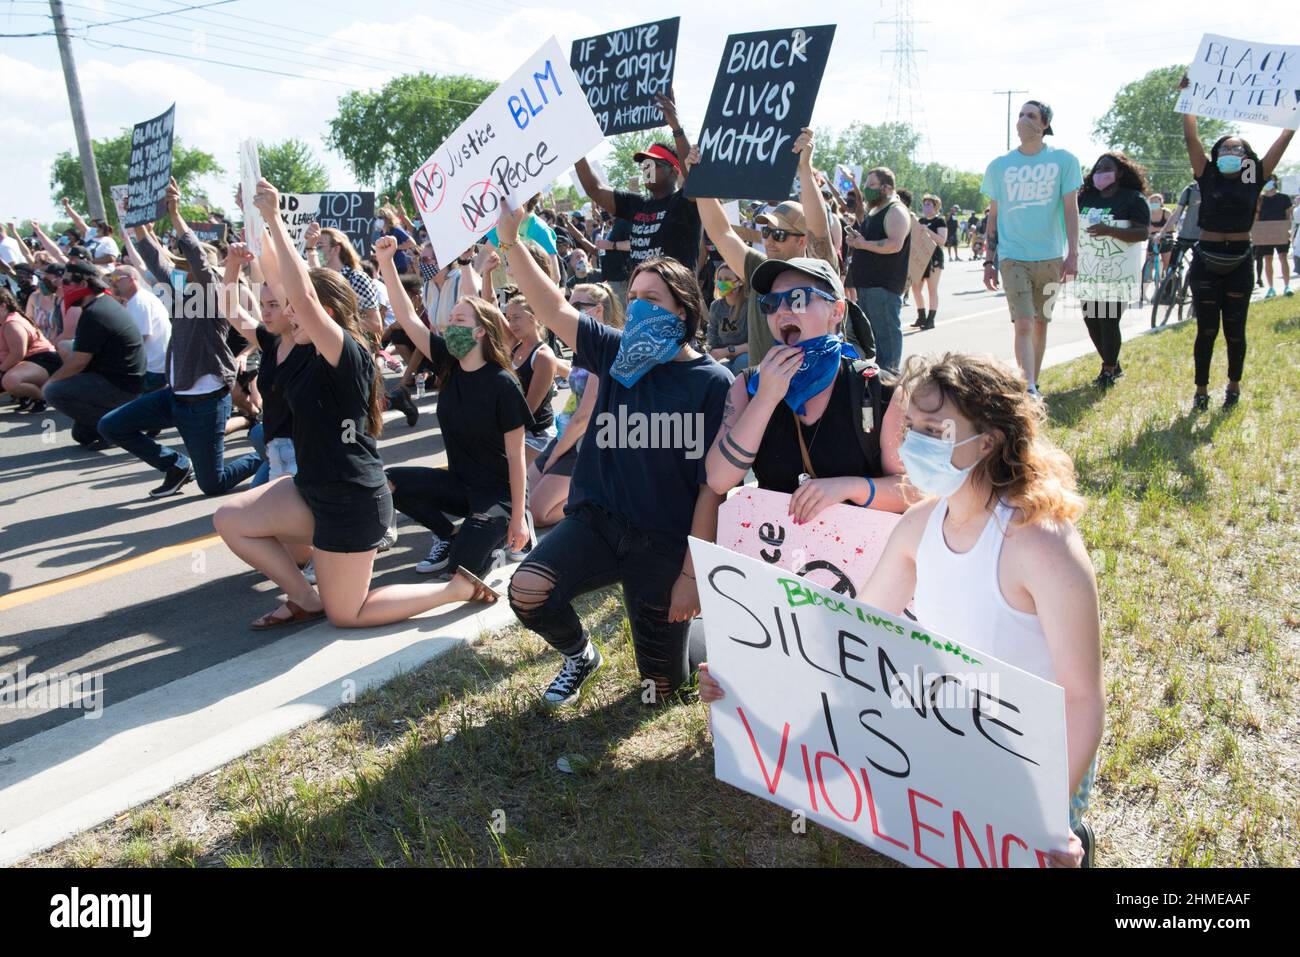 Protest marchers take a knee on Hall road in Sterling Heights, Michigan during the Black Lives Matter protest march. Stock Photo